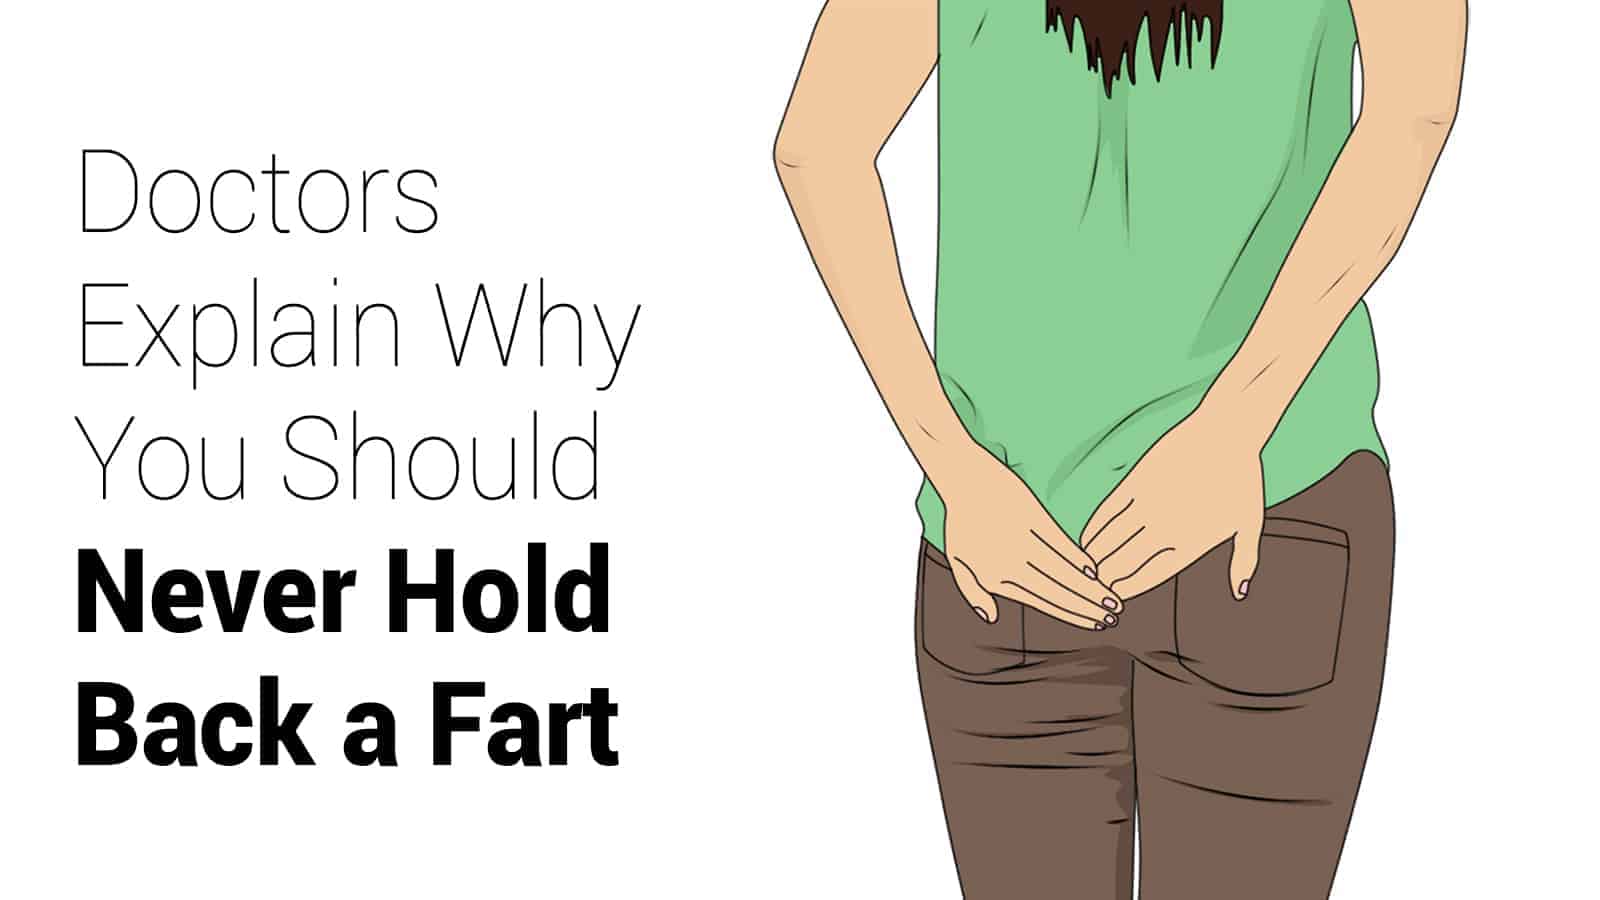 Doctors Explain Why You Should Never Hold Back a Fart